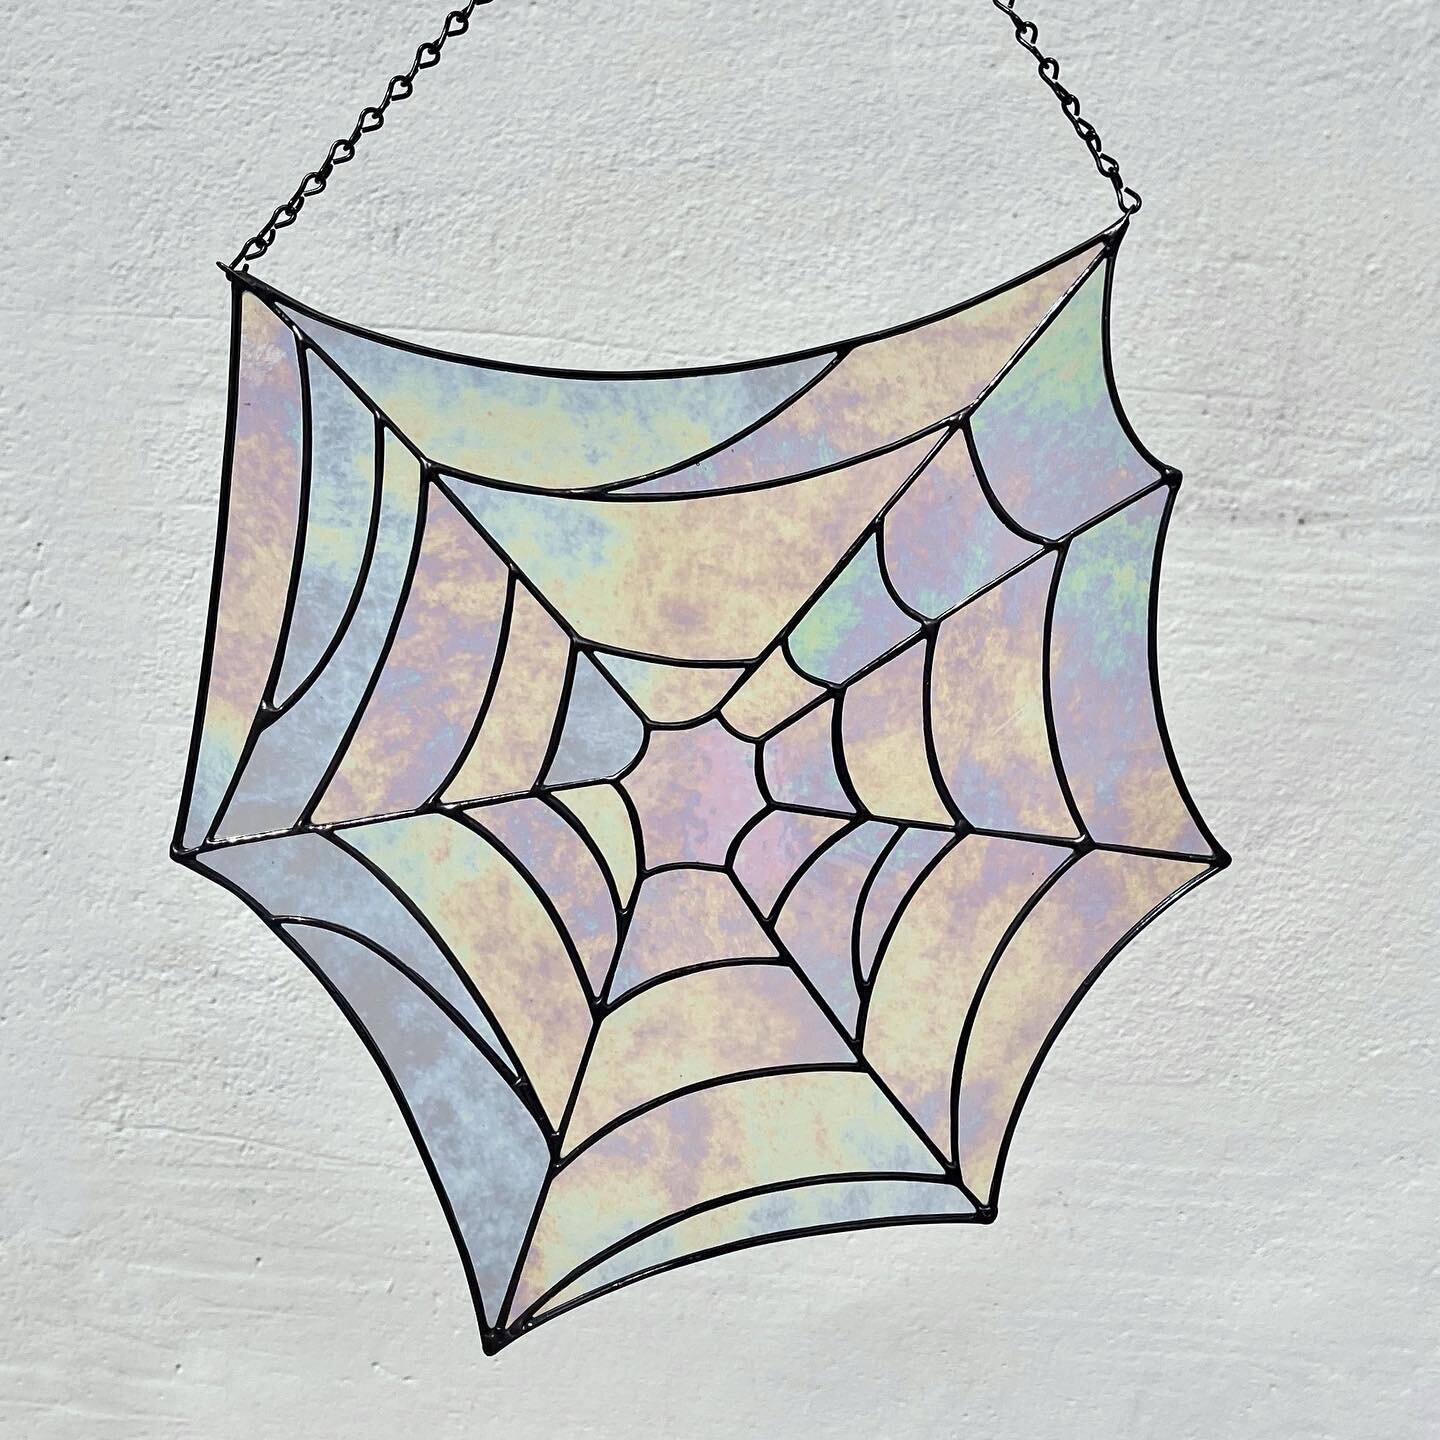 Happy Halloween everyone!!! 🕸️ 
I cut this spiderweb out in mid-September and just finally finished it today lol. But spooky season doesn&rsquo;t necessarily have to end today does it? 
If any of you want a giant iridescent spiderweb to hang in your